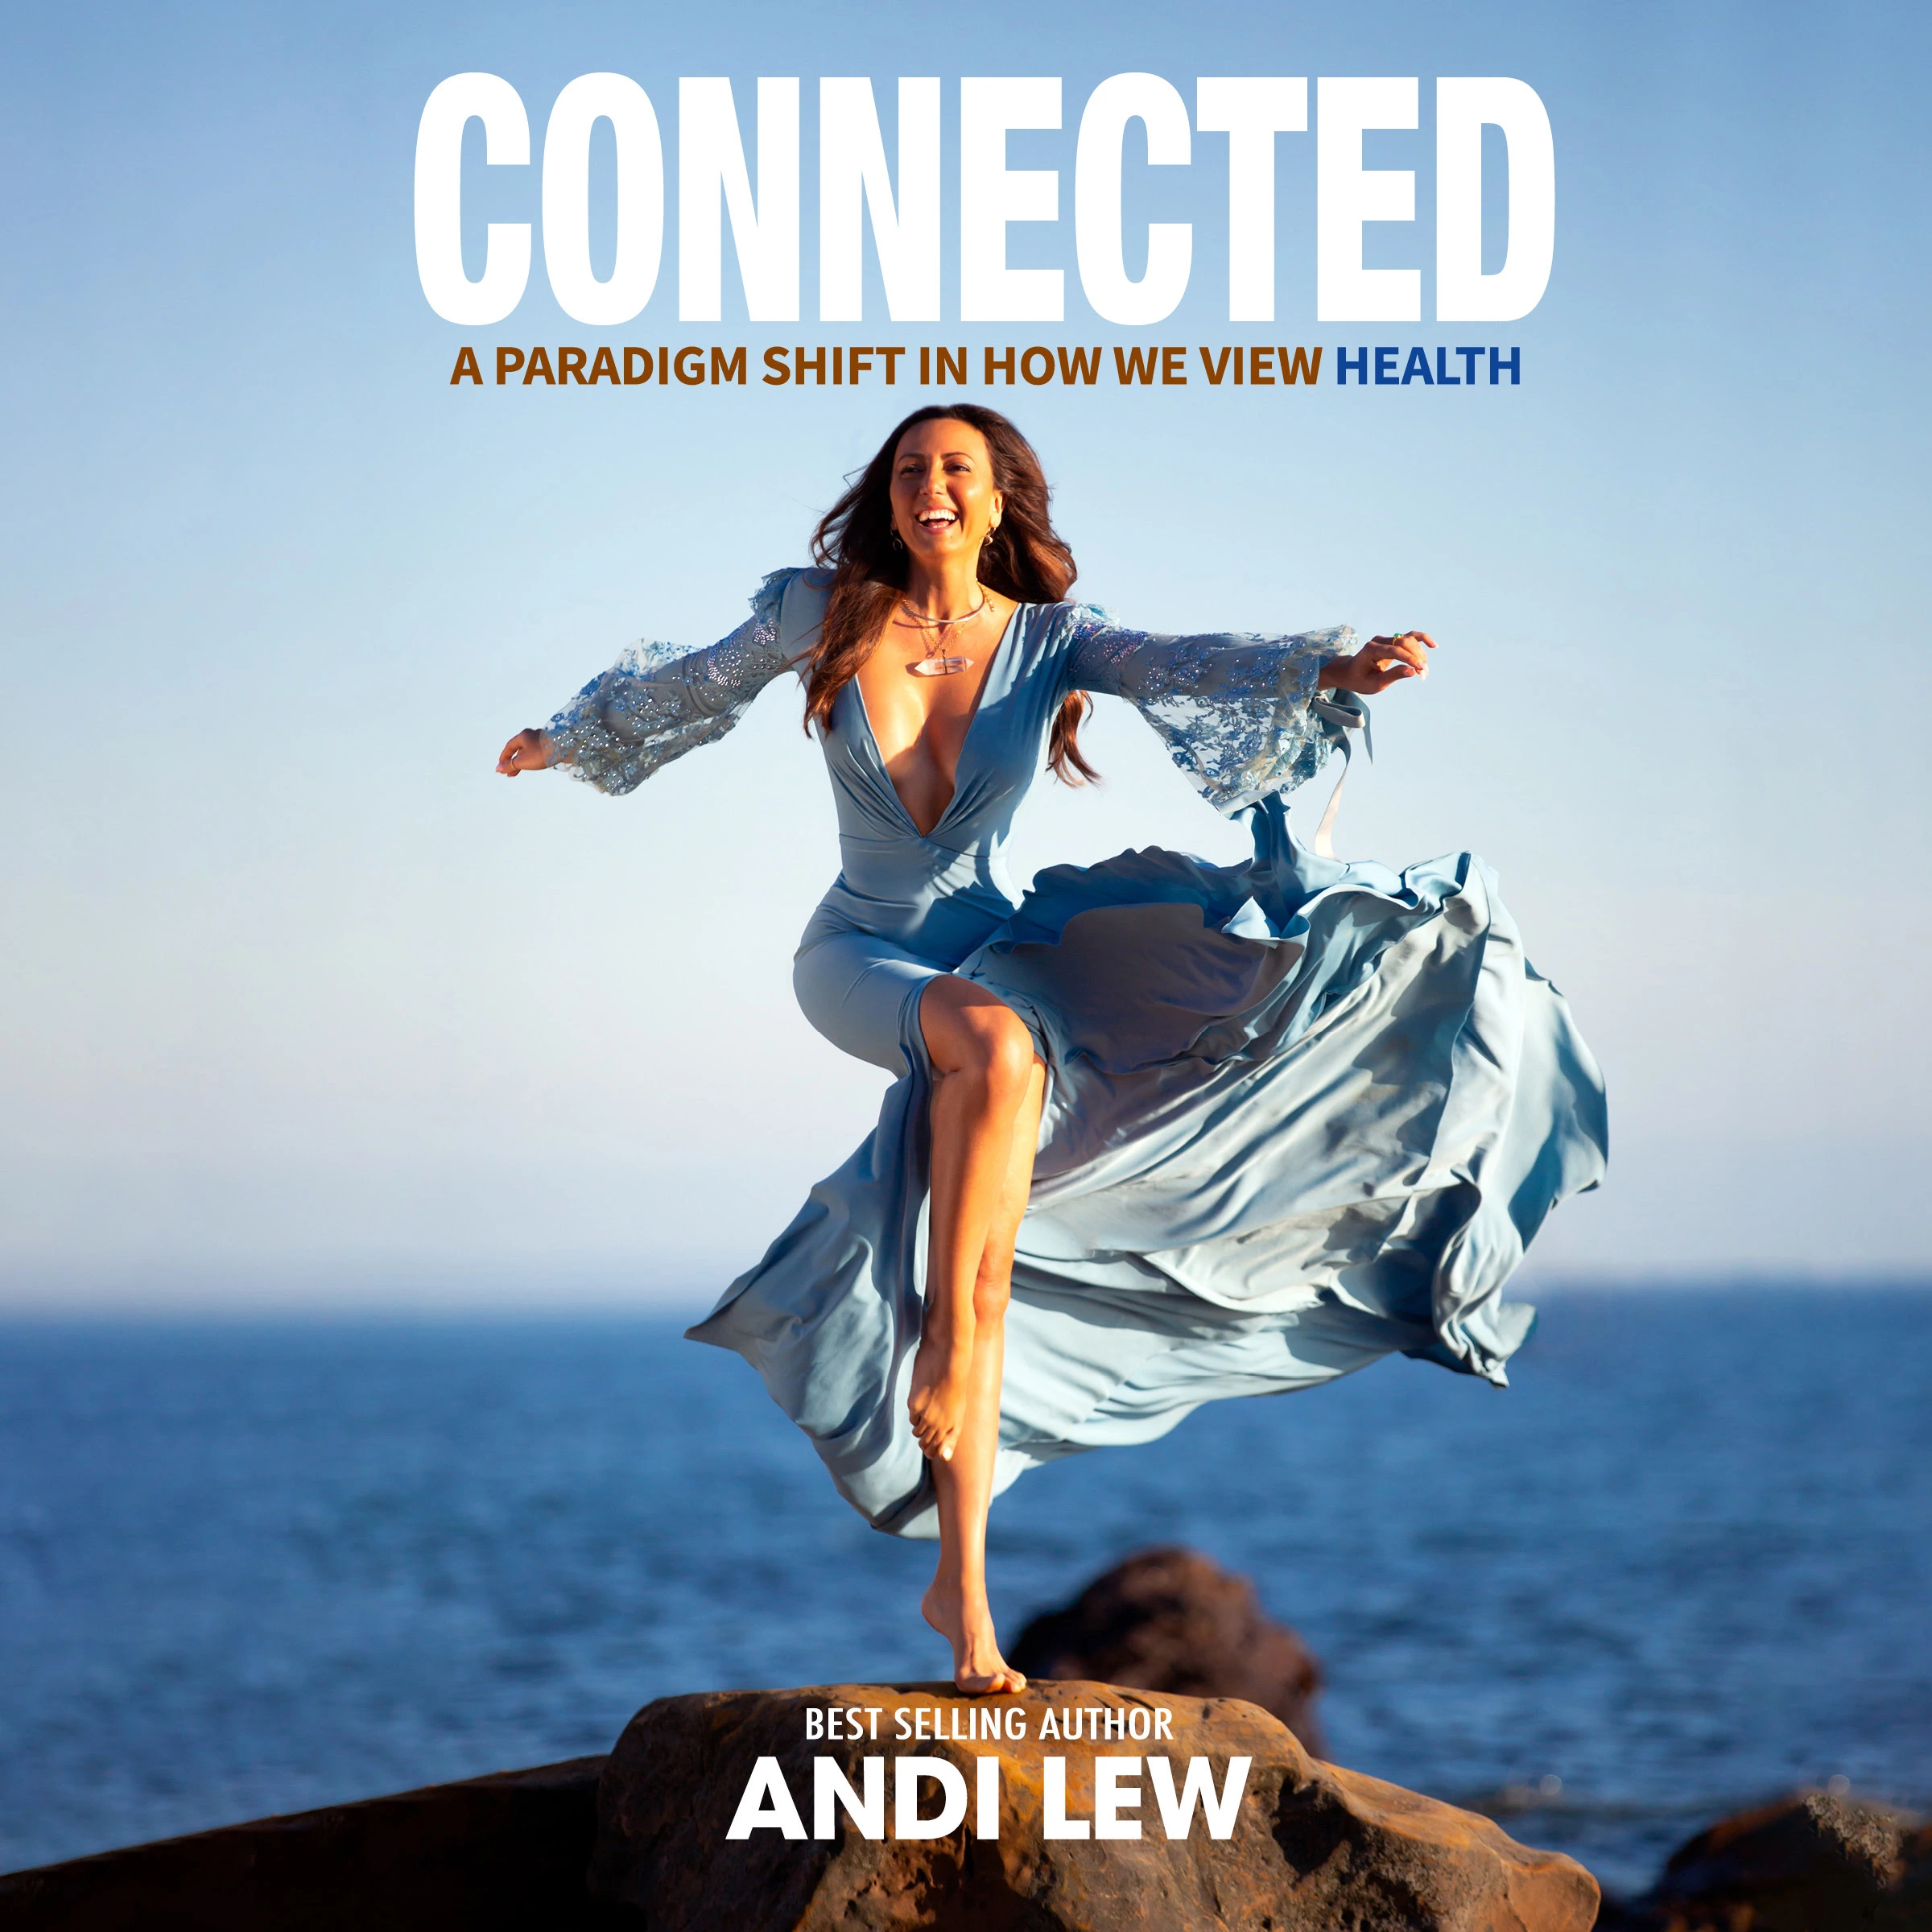 Connected Audiobook by Andi Lew